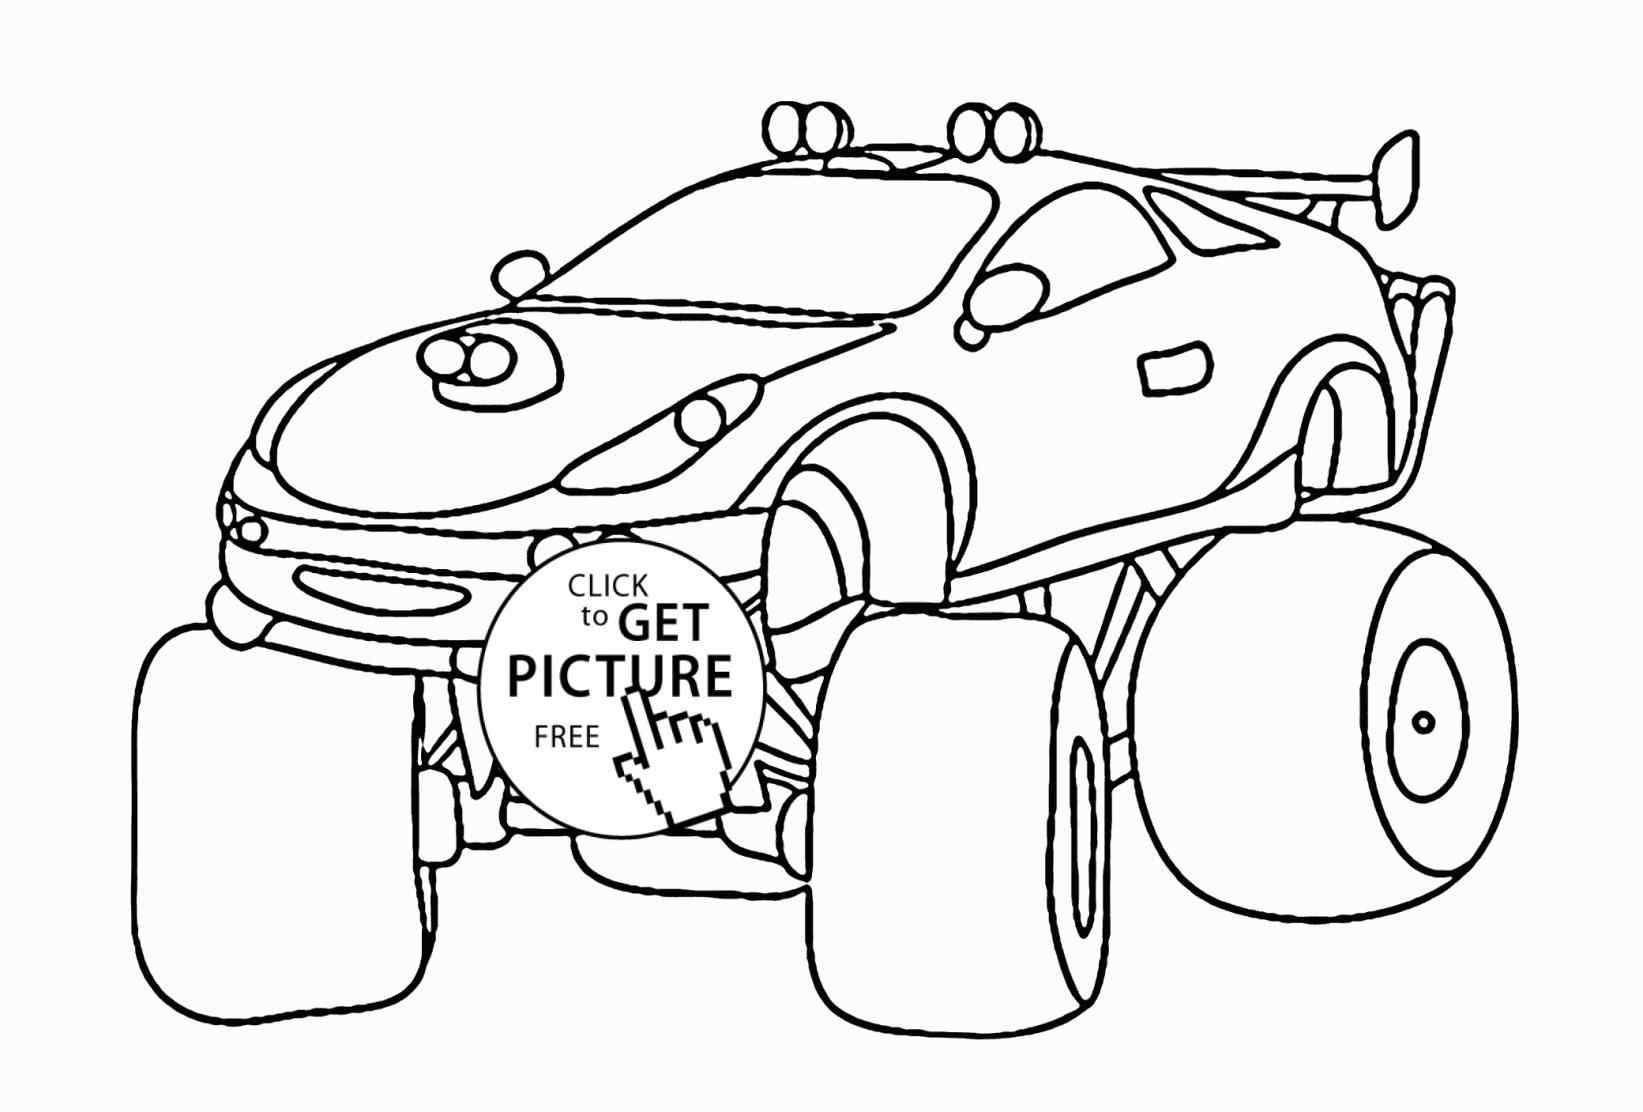 Batman Monster Truck Coloring Pages at GetColorings.com | Free ...